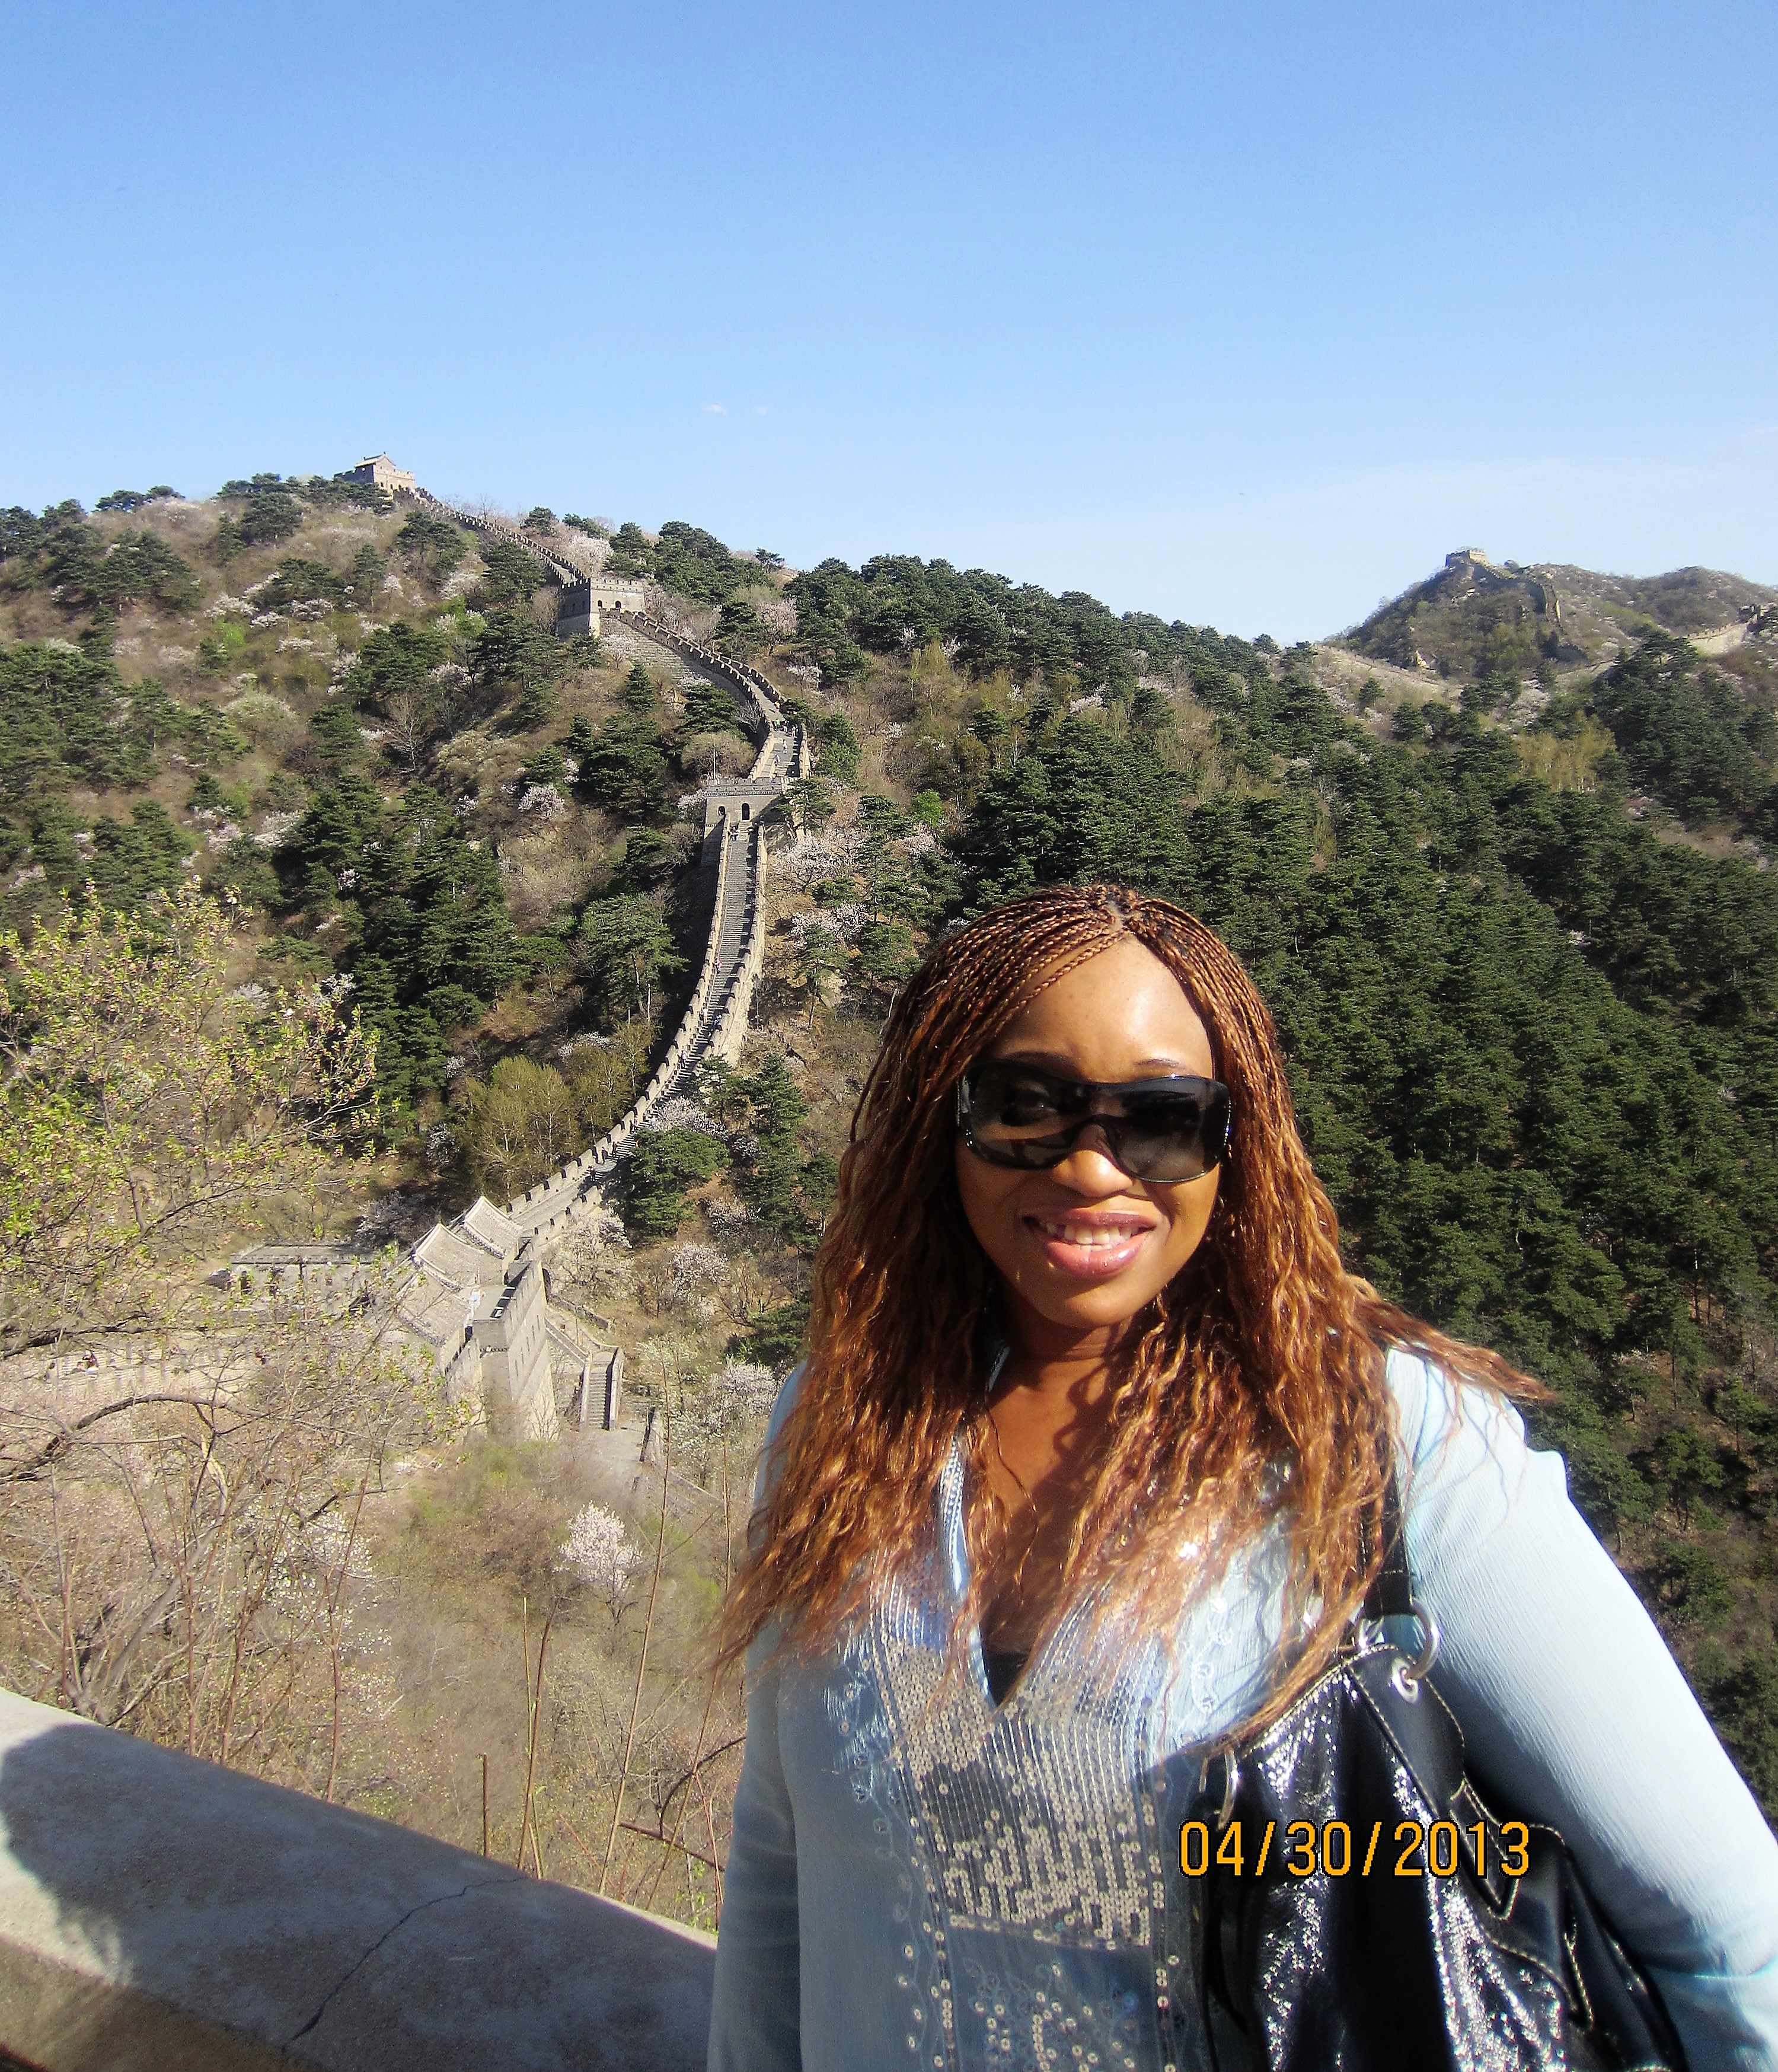 Jazzy Jess conquered the Great Wall of China